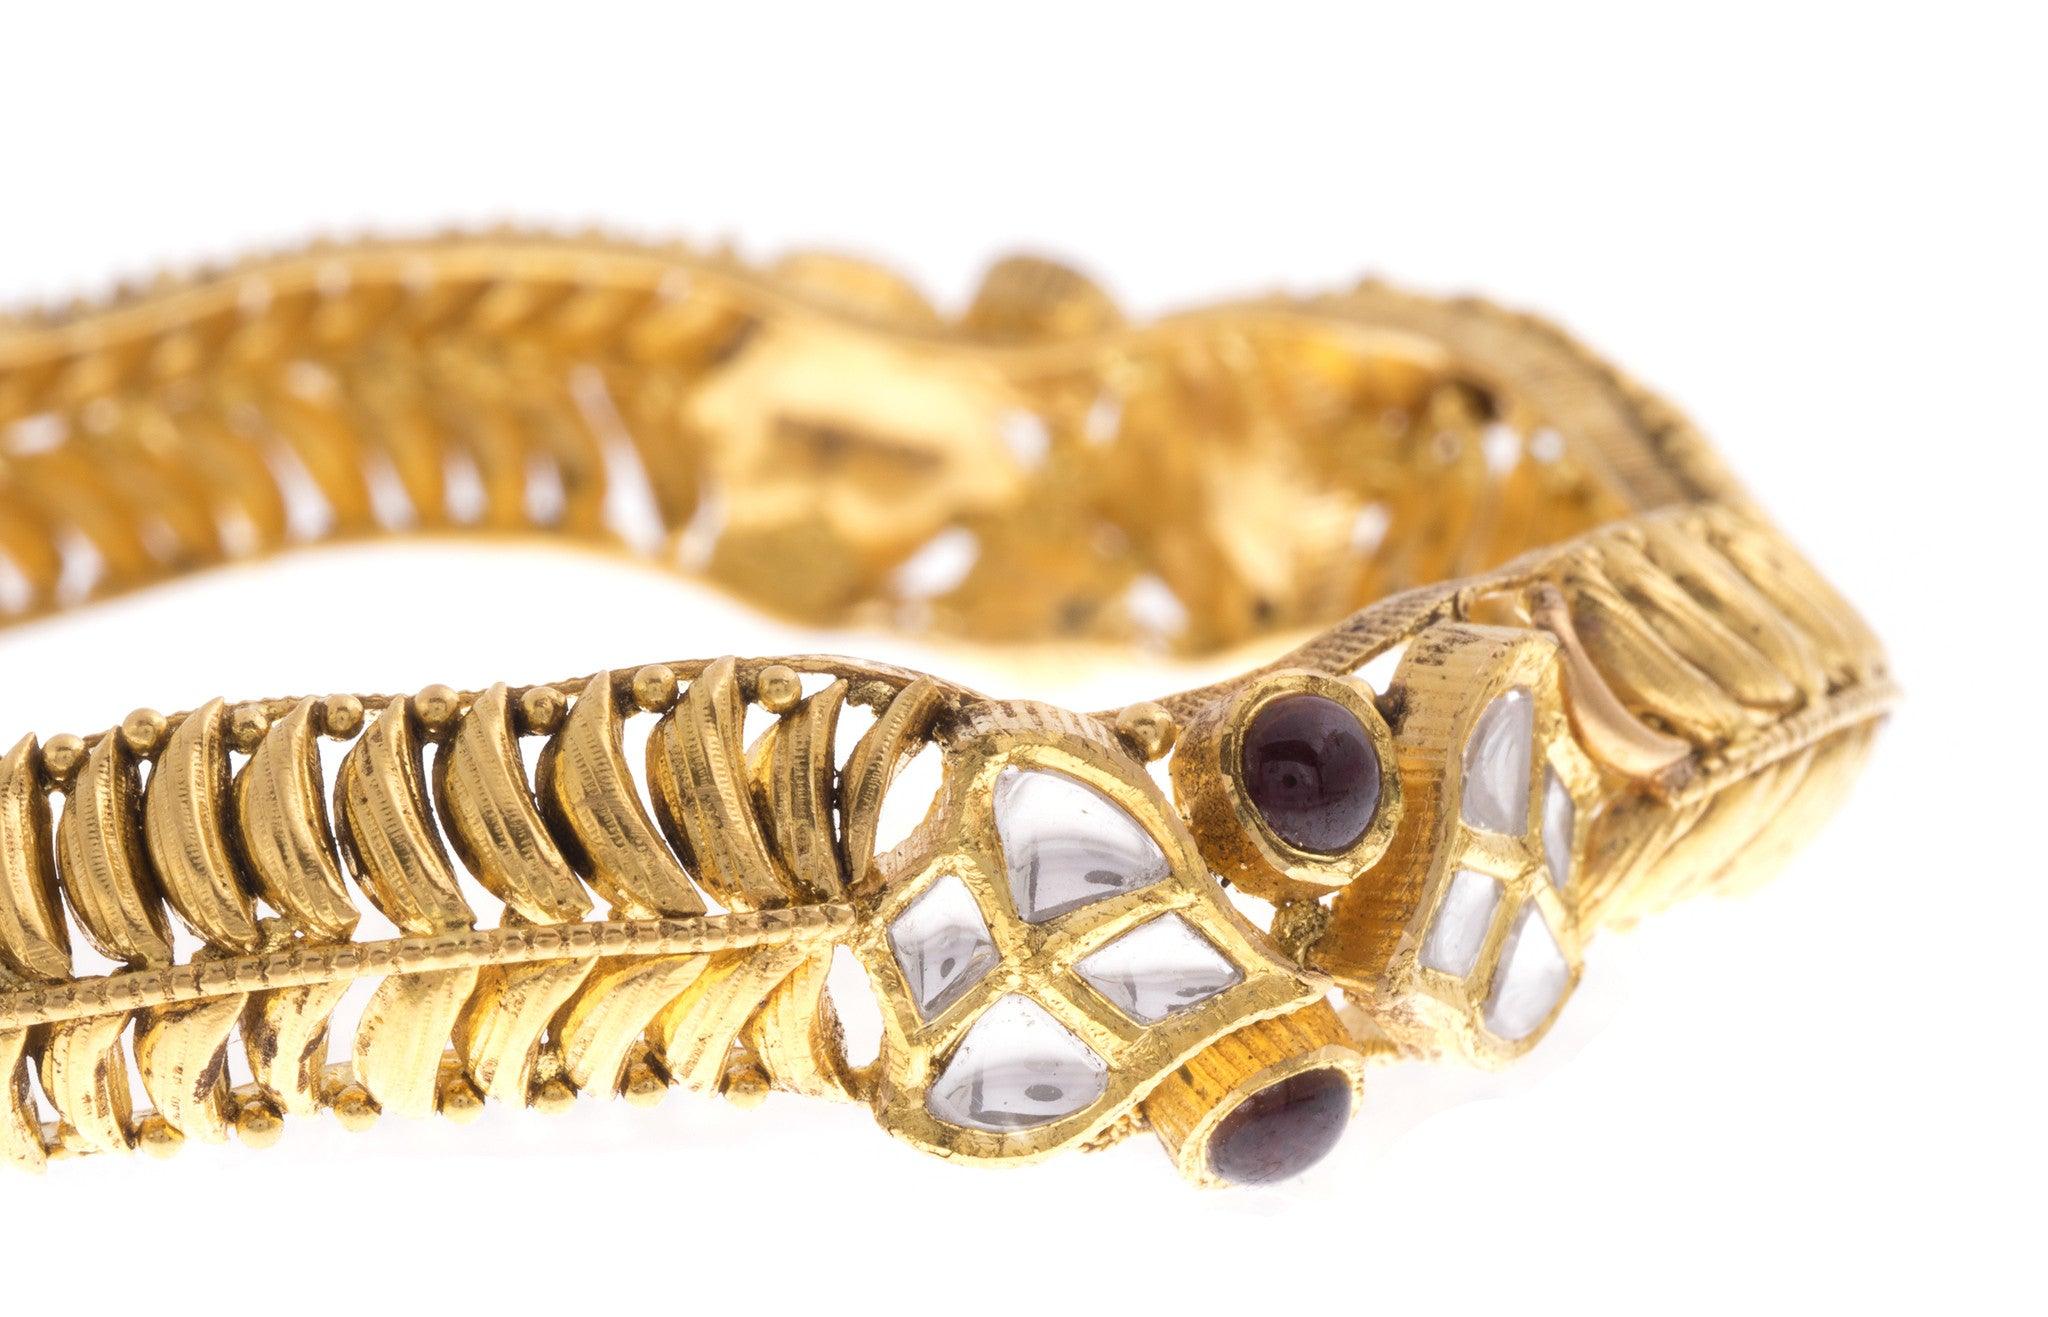 22ct Yellow Gold Antique Look Bangle with Synthetic Stones (G1753), Minar Jewellers - 7